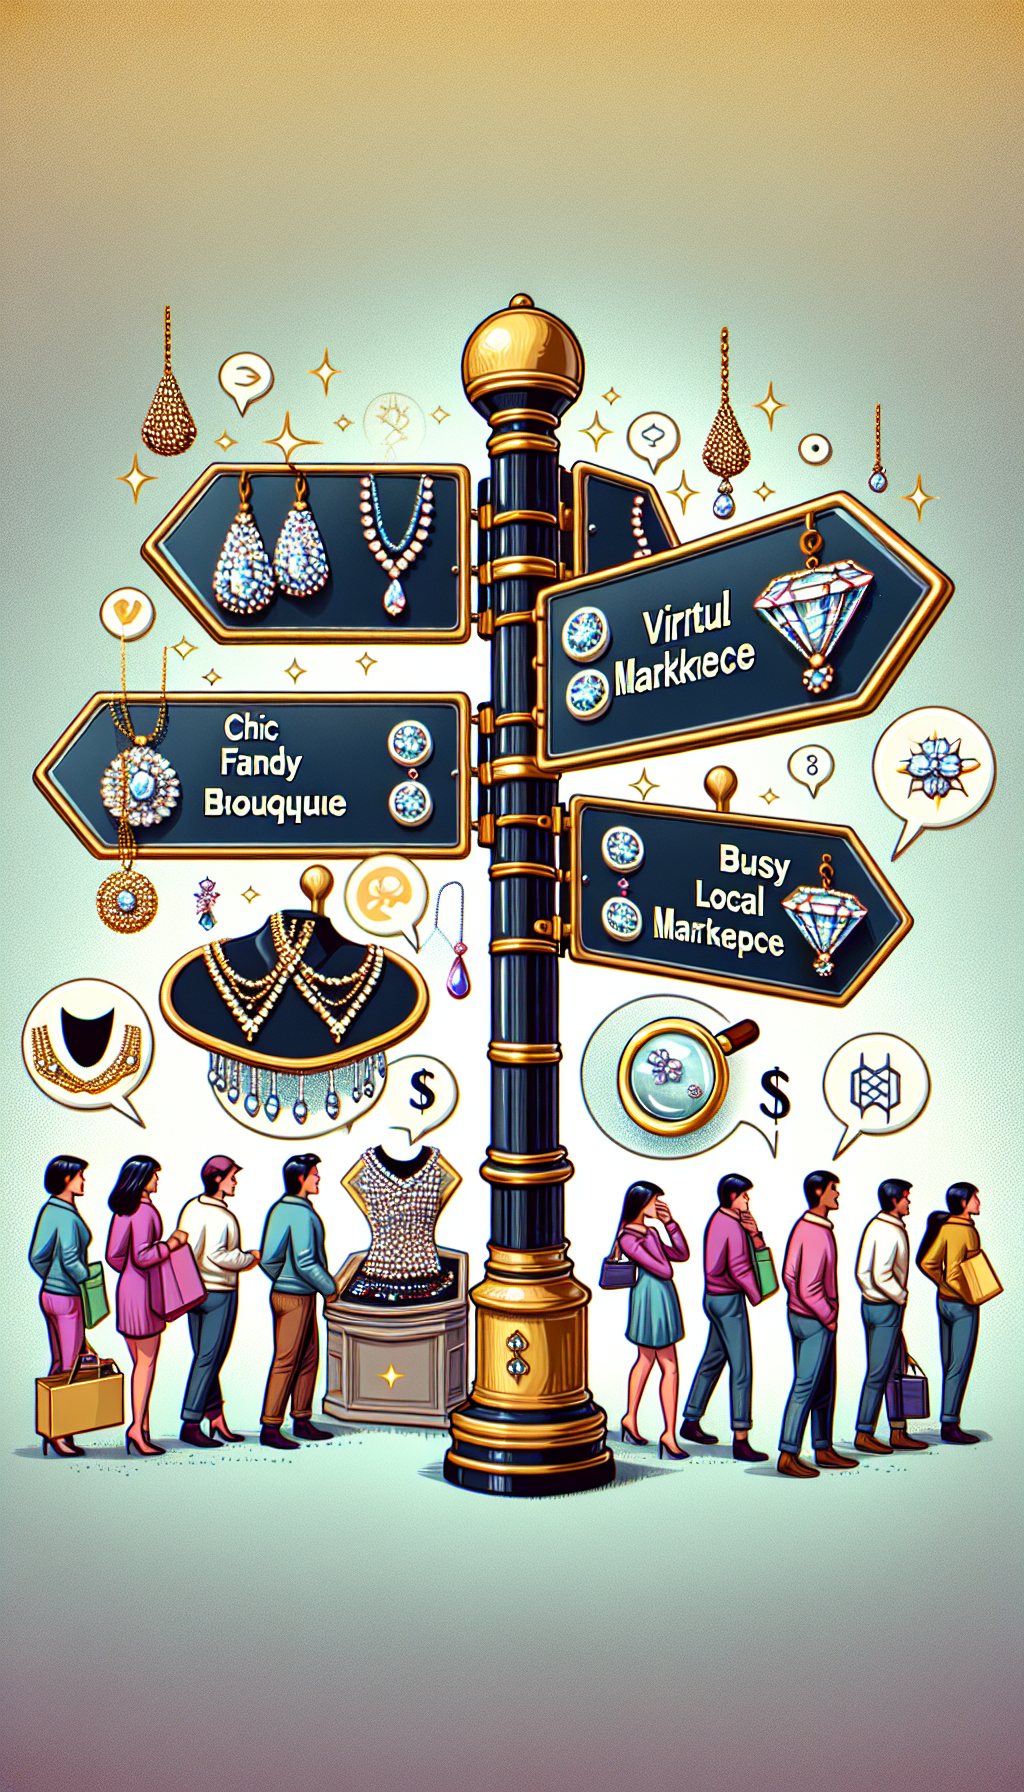 An illustration showcases a split, three-way street sign pointing towards a chic boutique, a bustling online platform, and a cozy local market, each with a shimmering piece of jewelry above it and a list of floating pros and cons icons beside. Below, a magnifying glass hovers over jewels with price tags, as a line of potential buyers approaches, representing appraisal and sale points.